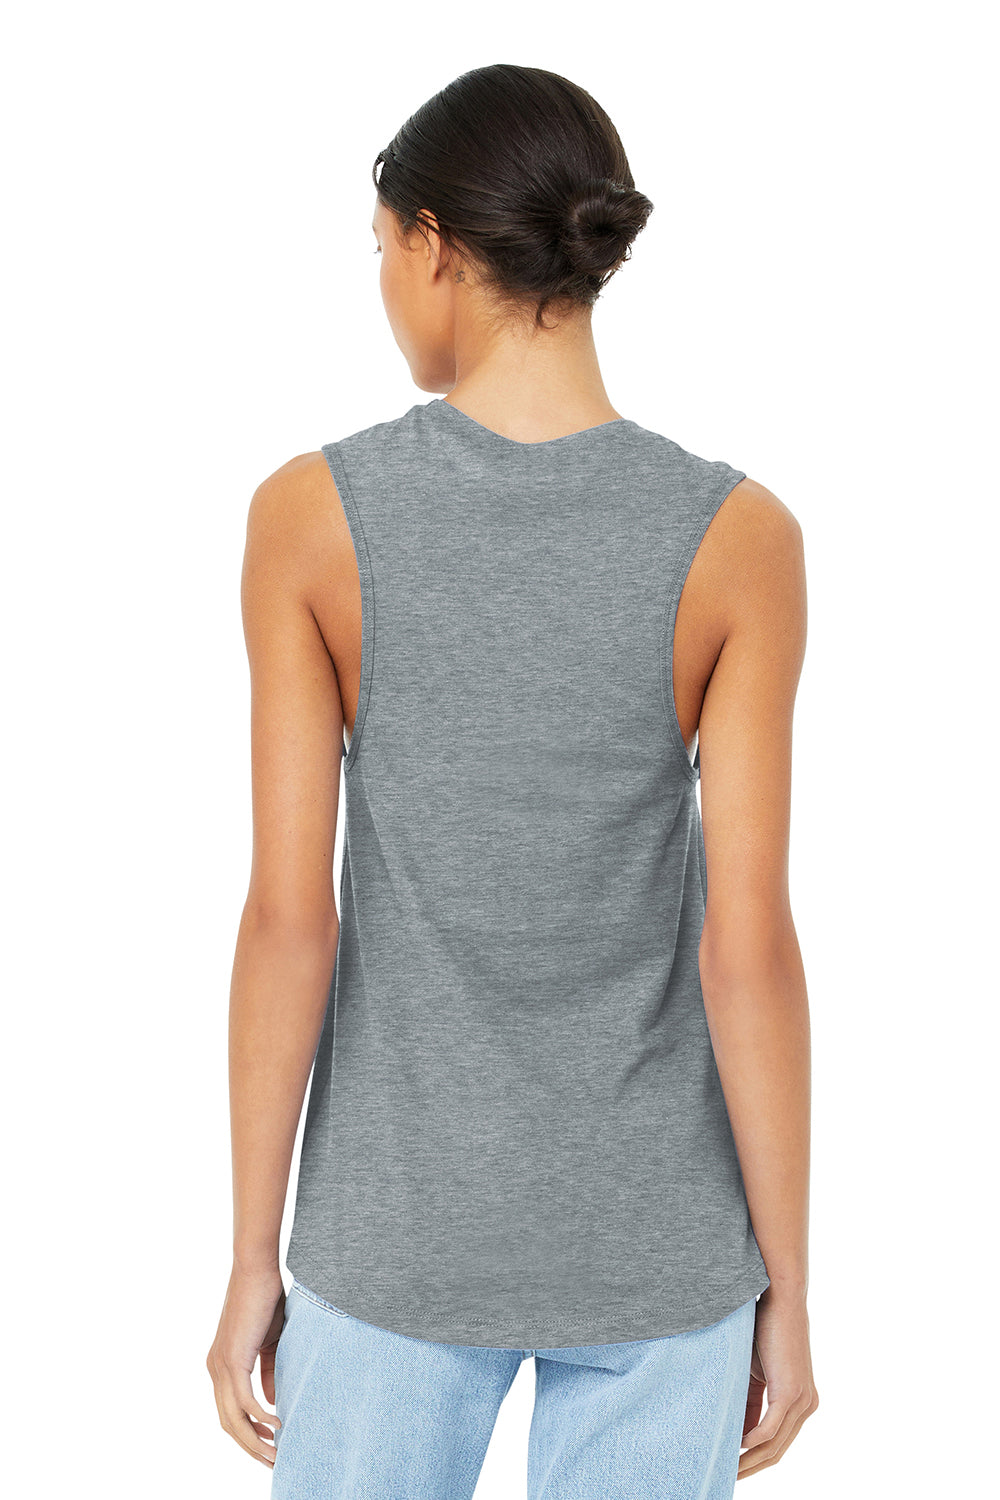 Bella + Canvas BC6003/B6003/6003 Womens Jersey Muscle Tank Top Heather Grey Model Back